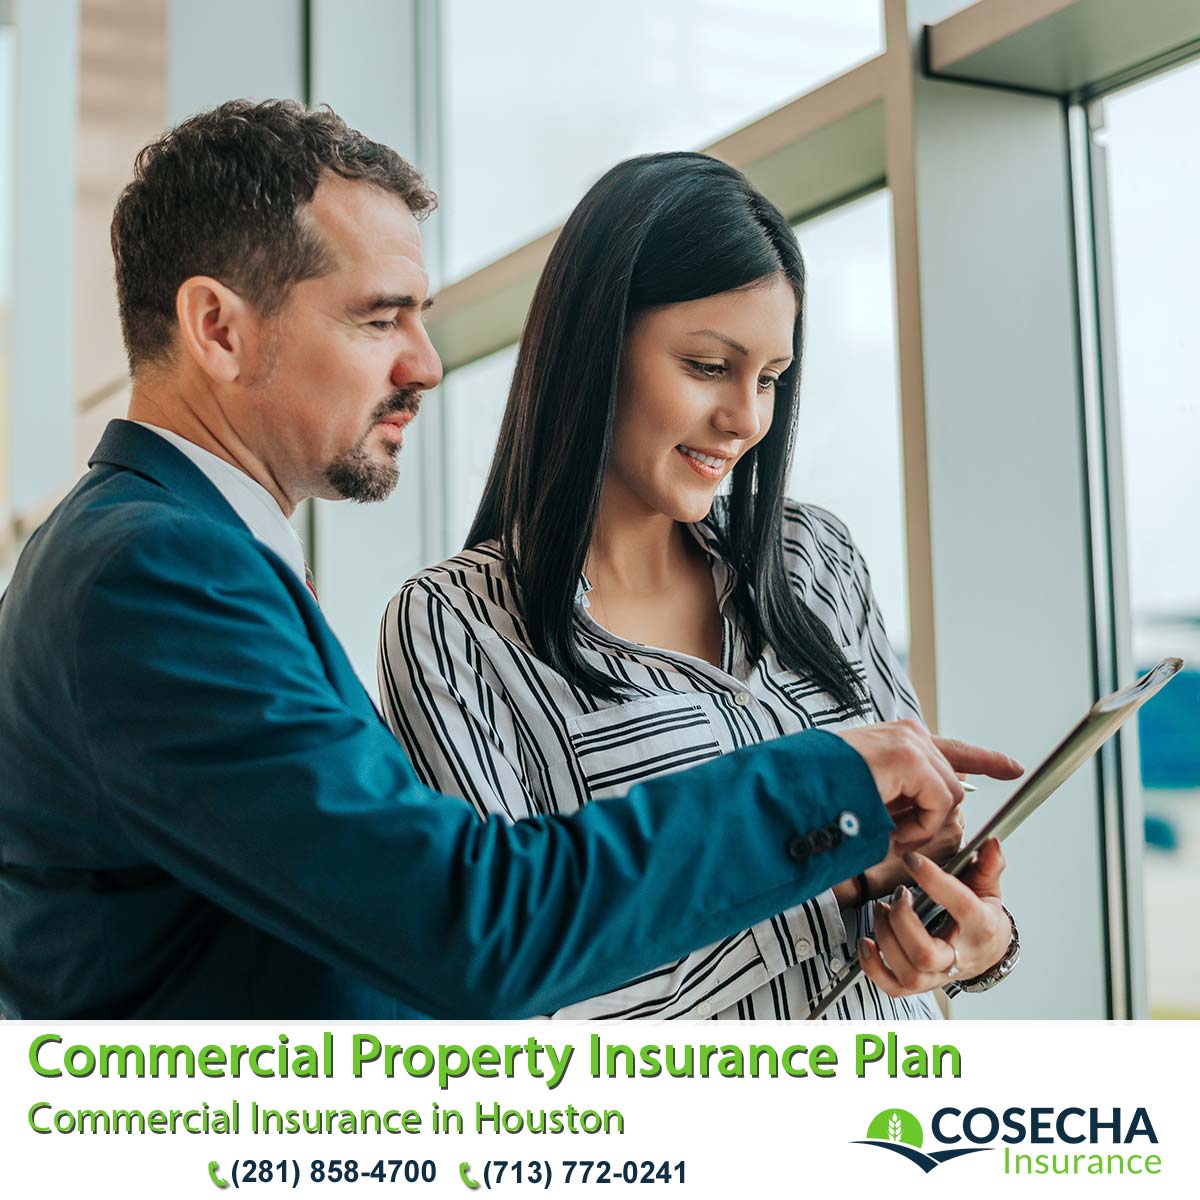 21 Commercial Property Insurance Plan